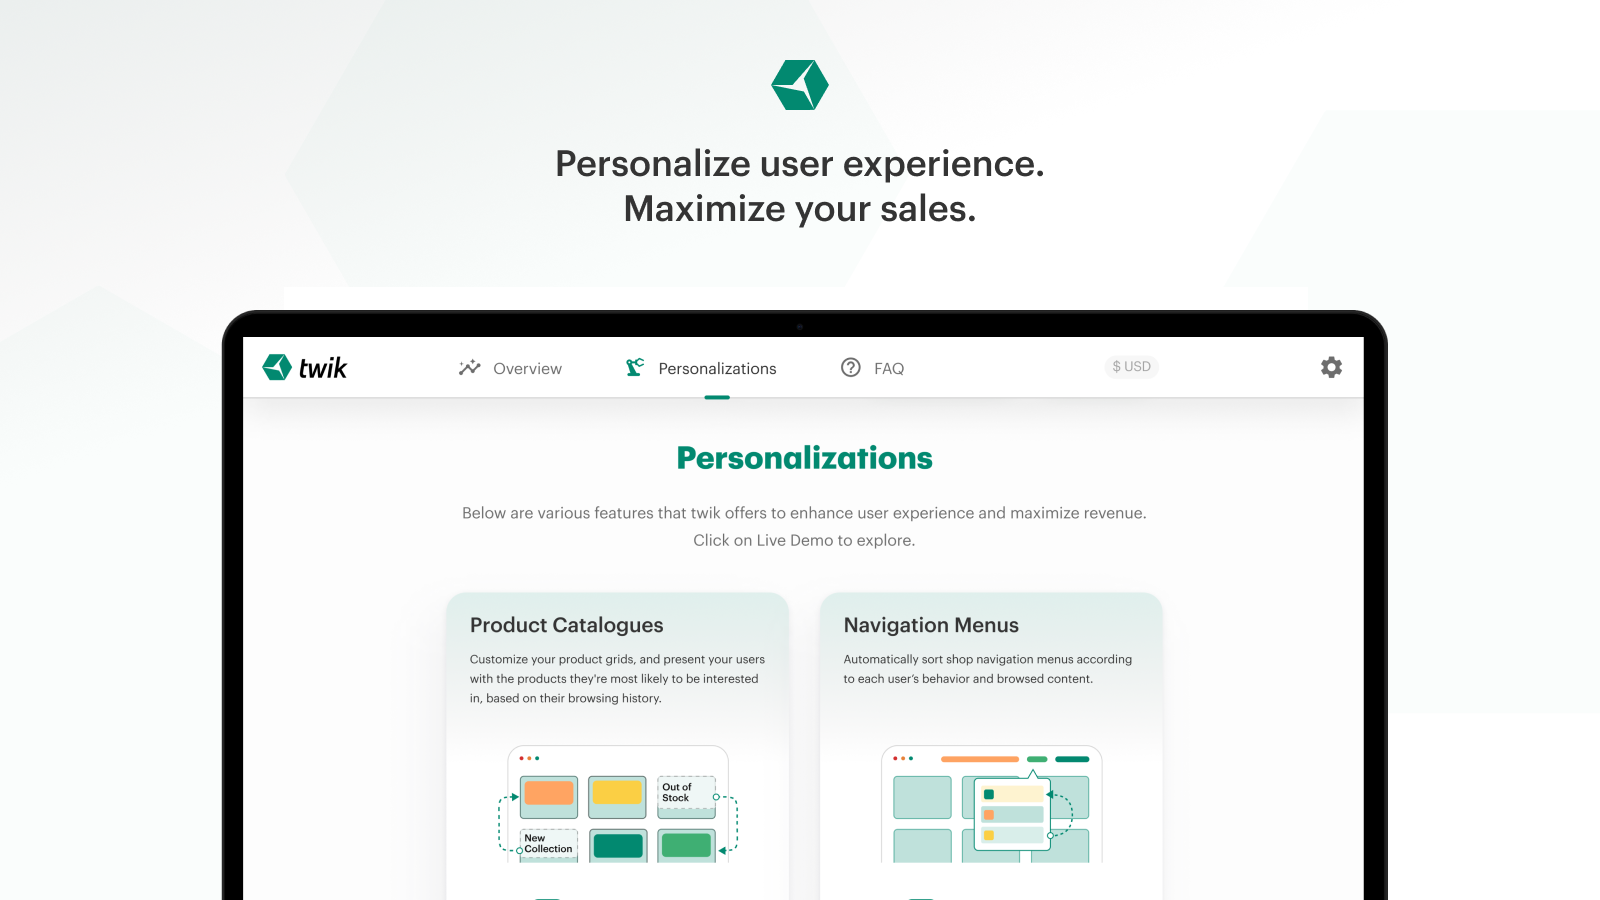 Enable twik and personalization automations in your shop